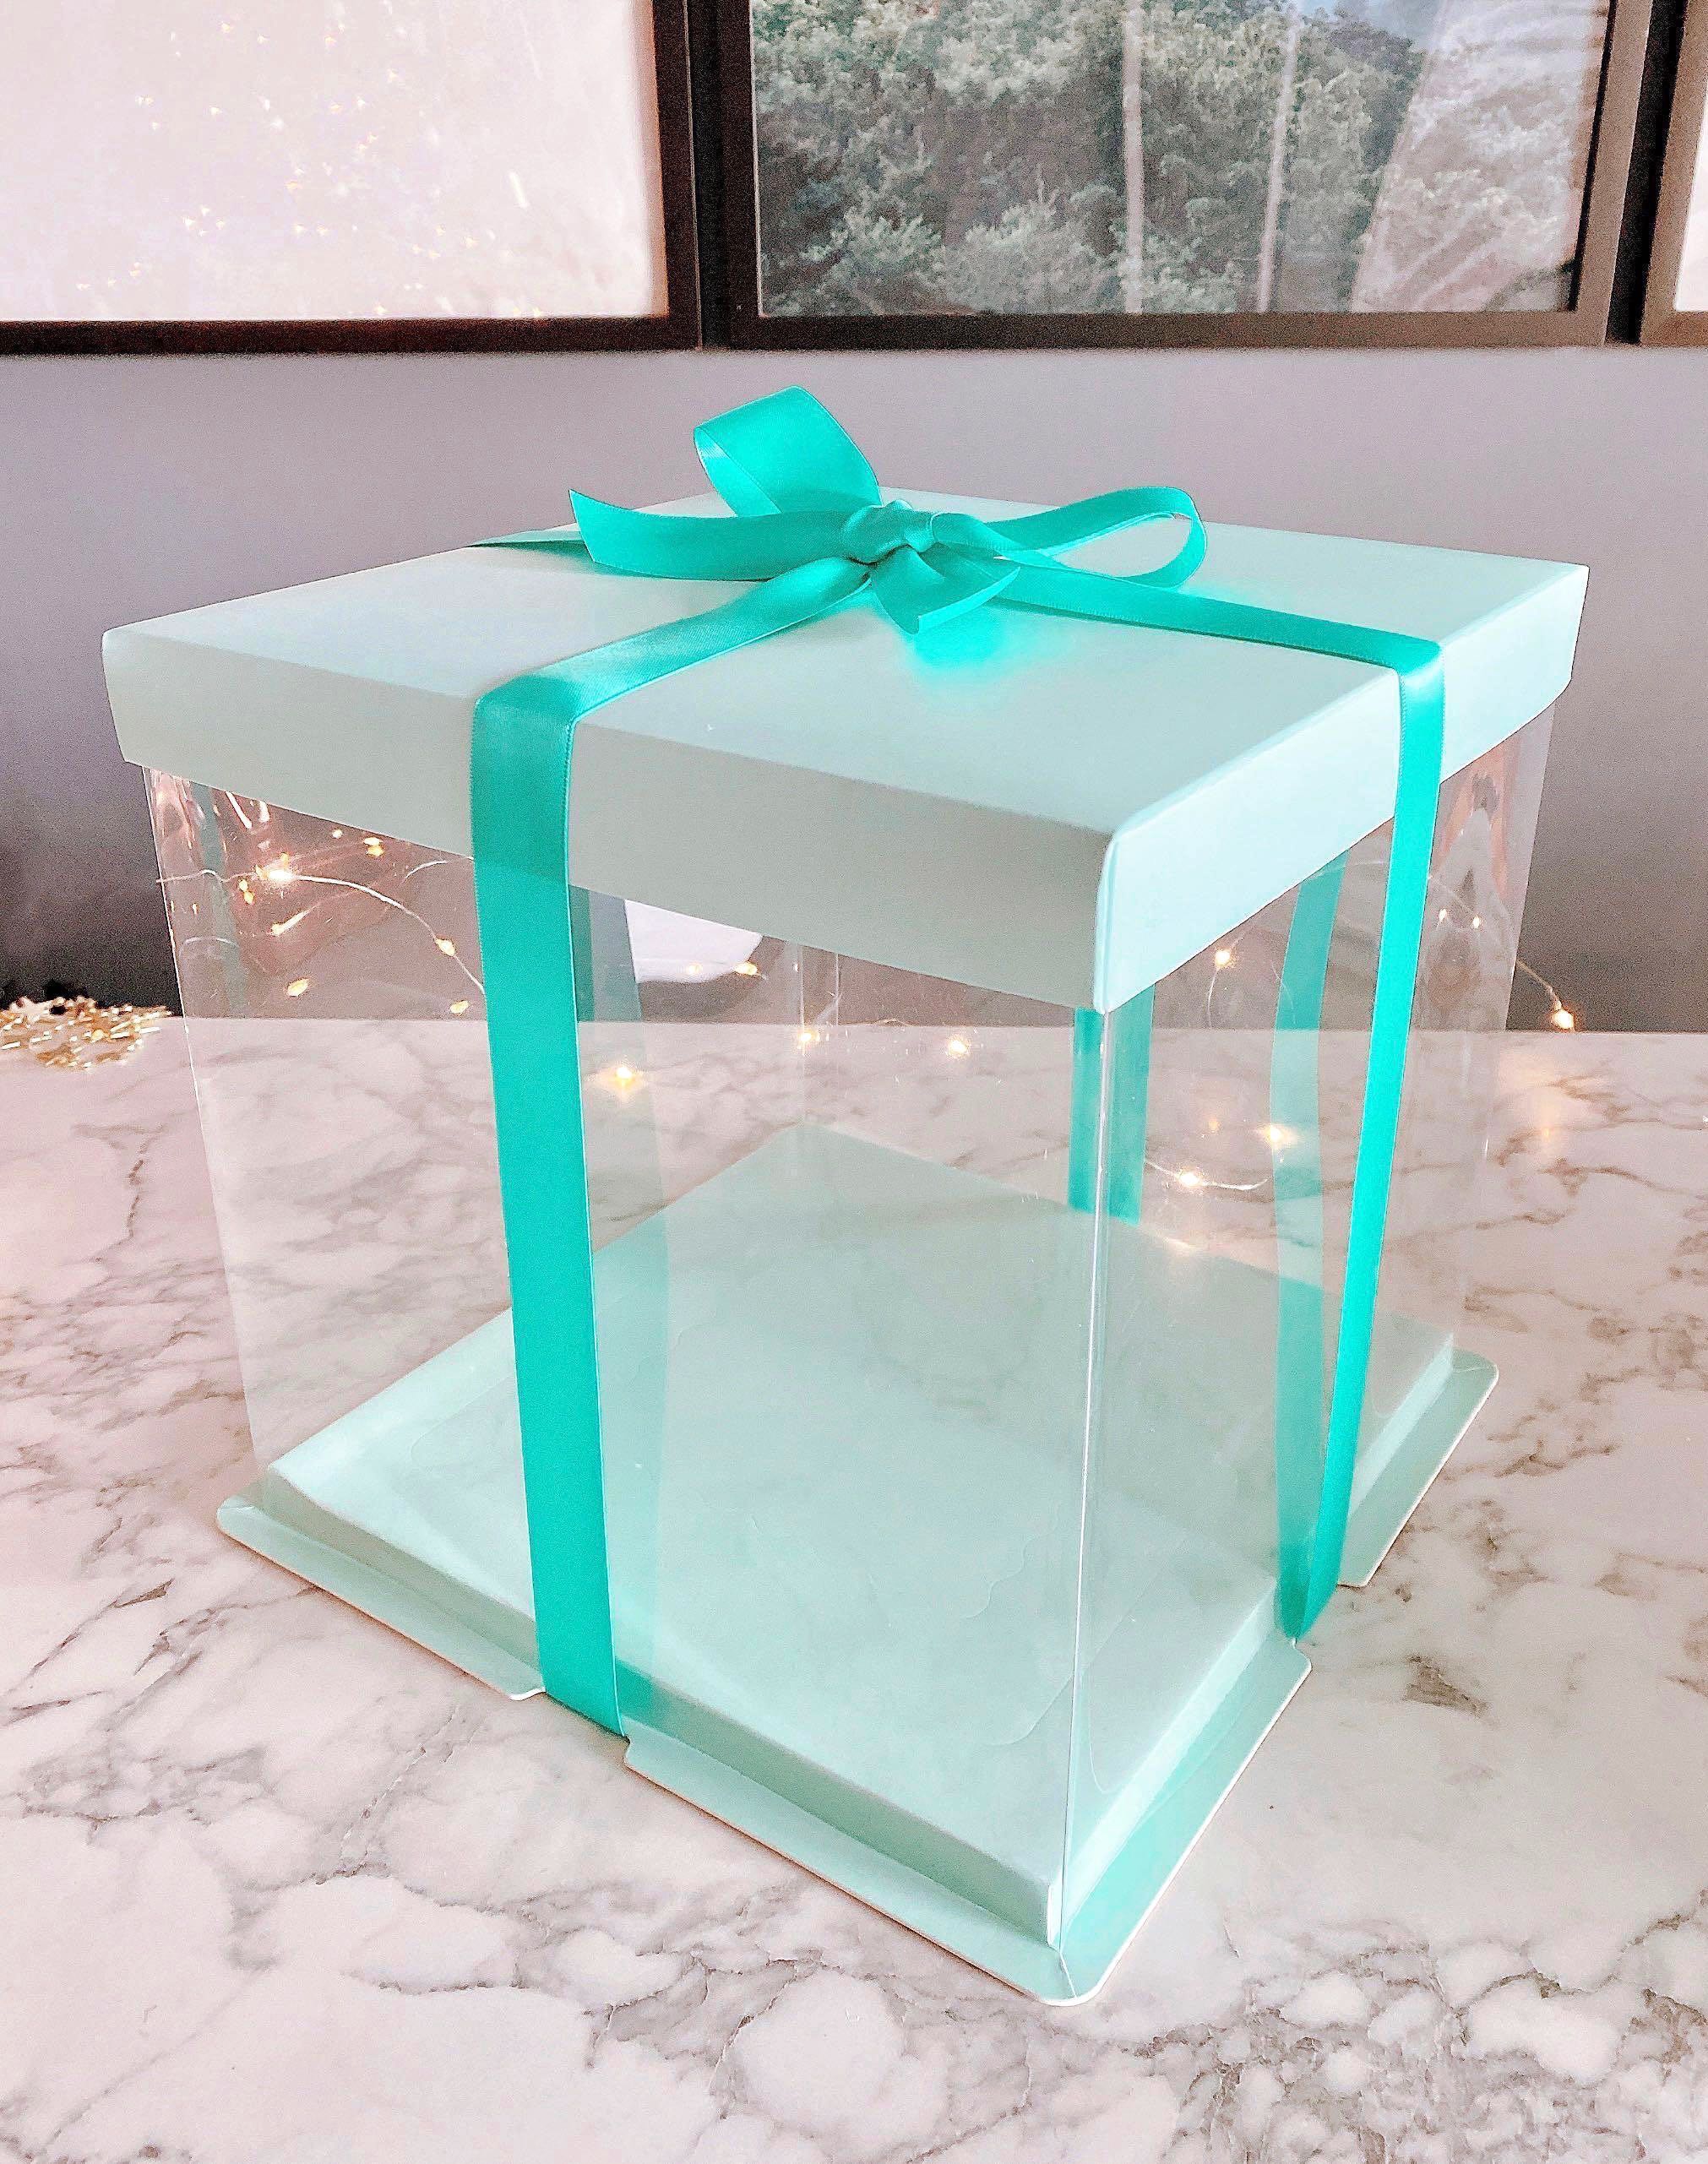 26 26 32cm High Transparent Square 10 Inch 2 Tiers Cake Box For Cake Gift Packaging Clear Box For Bakery Present Exhibition Box Gift Bags Wrapping Supplies Aliexpress